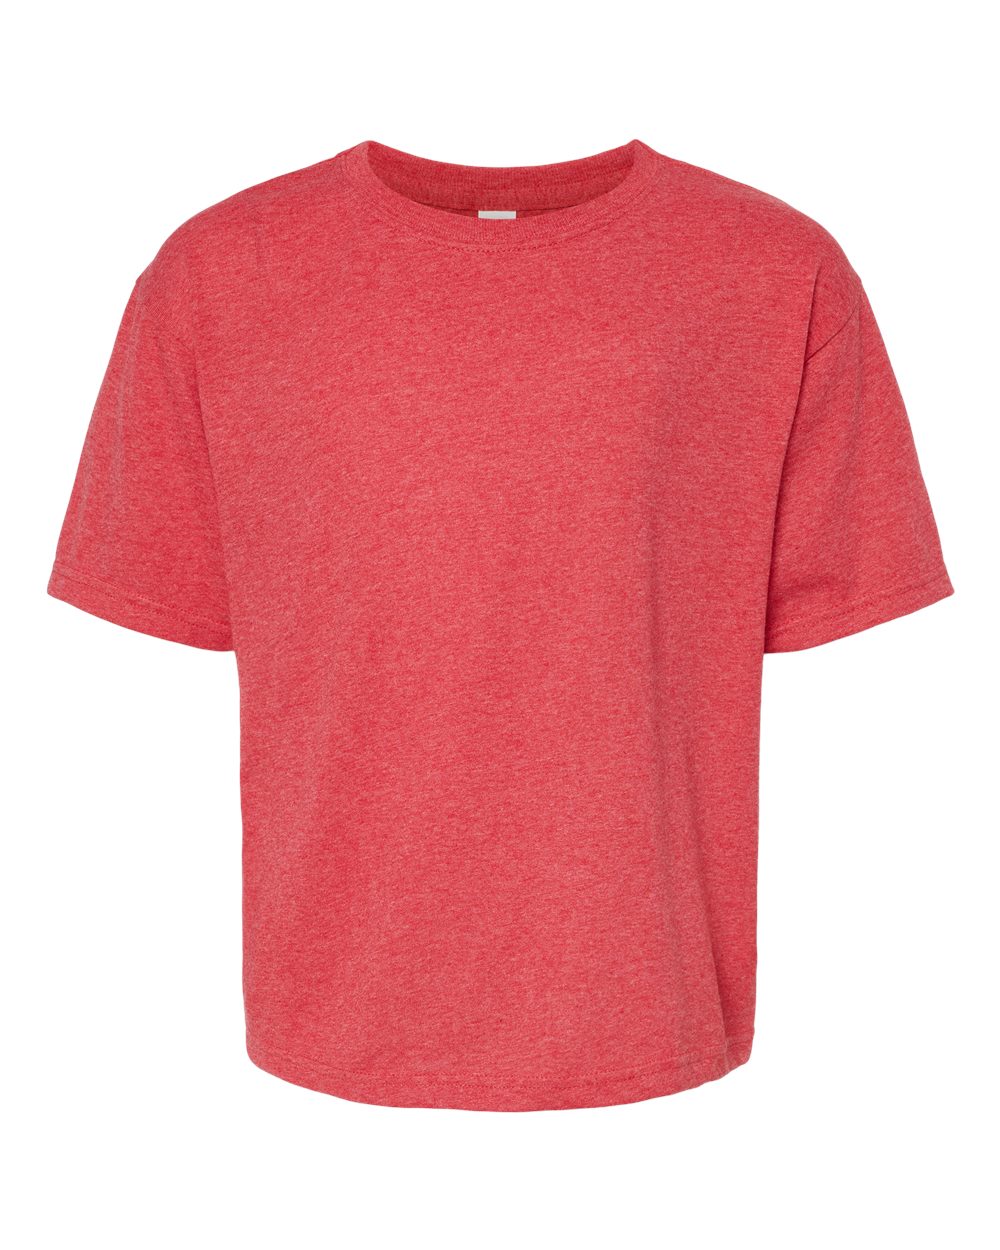 M&O Youth Gold Soft Touch T-Shirt 4850 #color_Heather Red